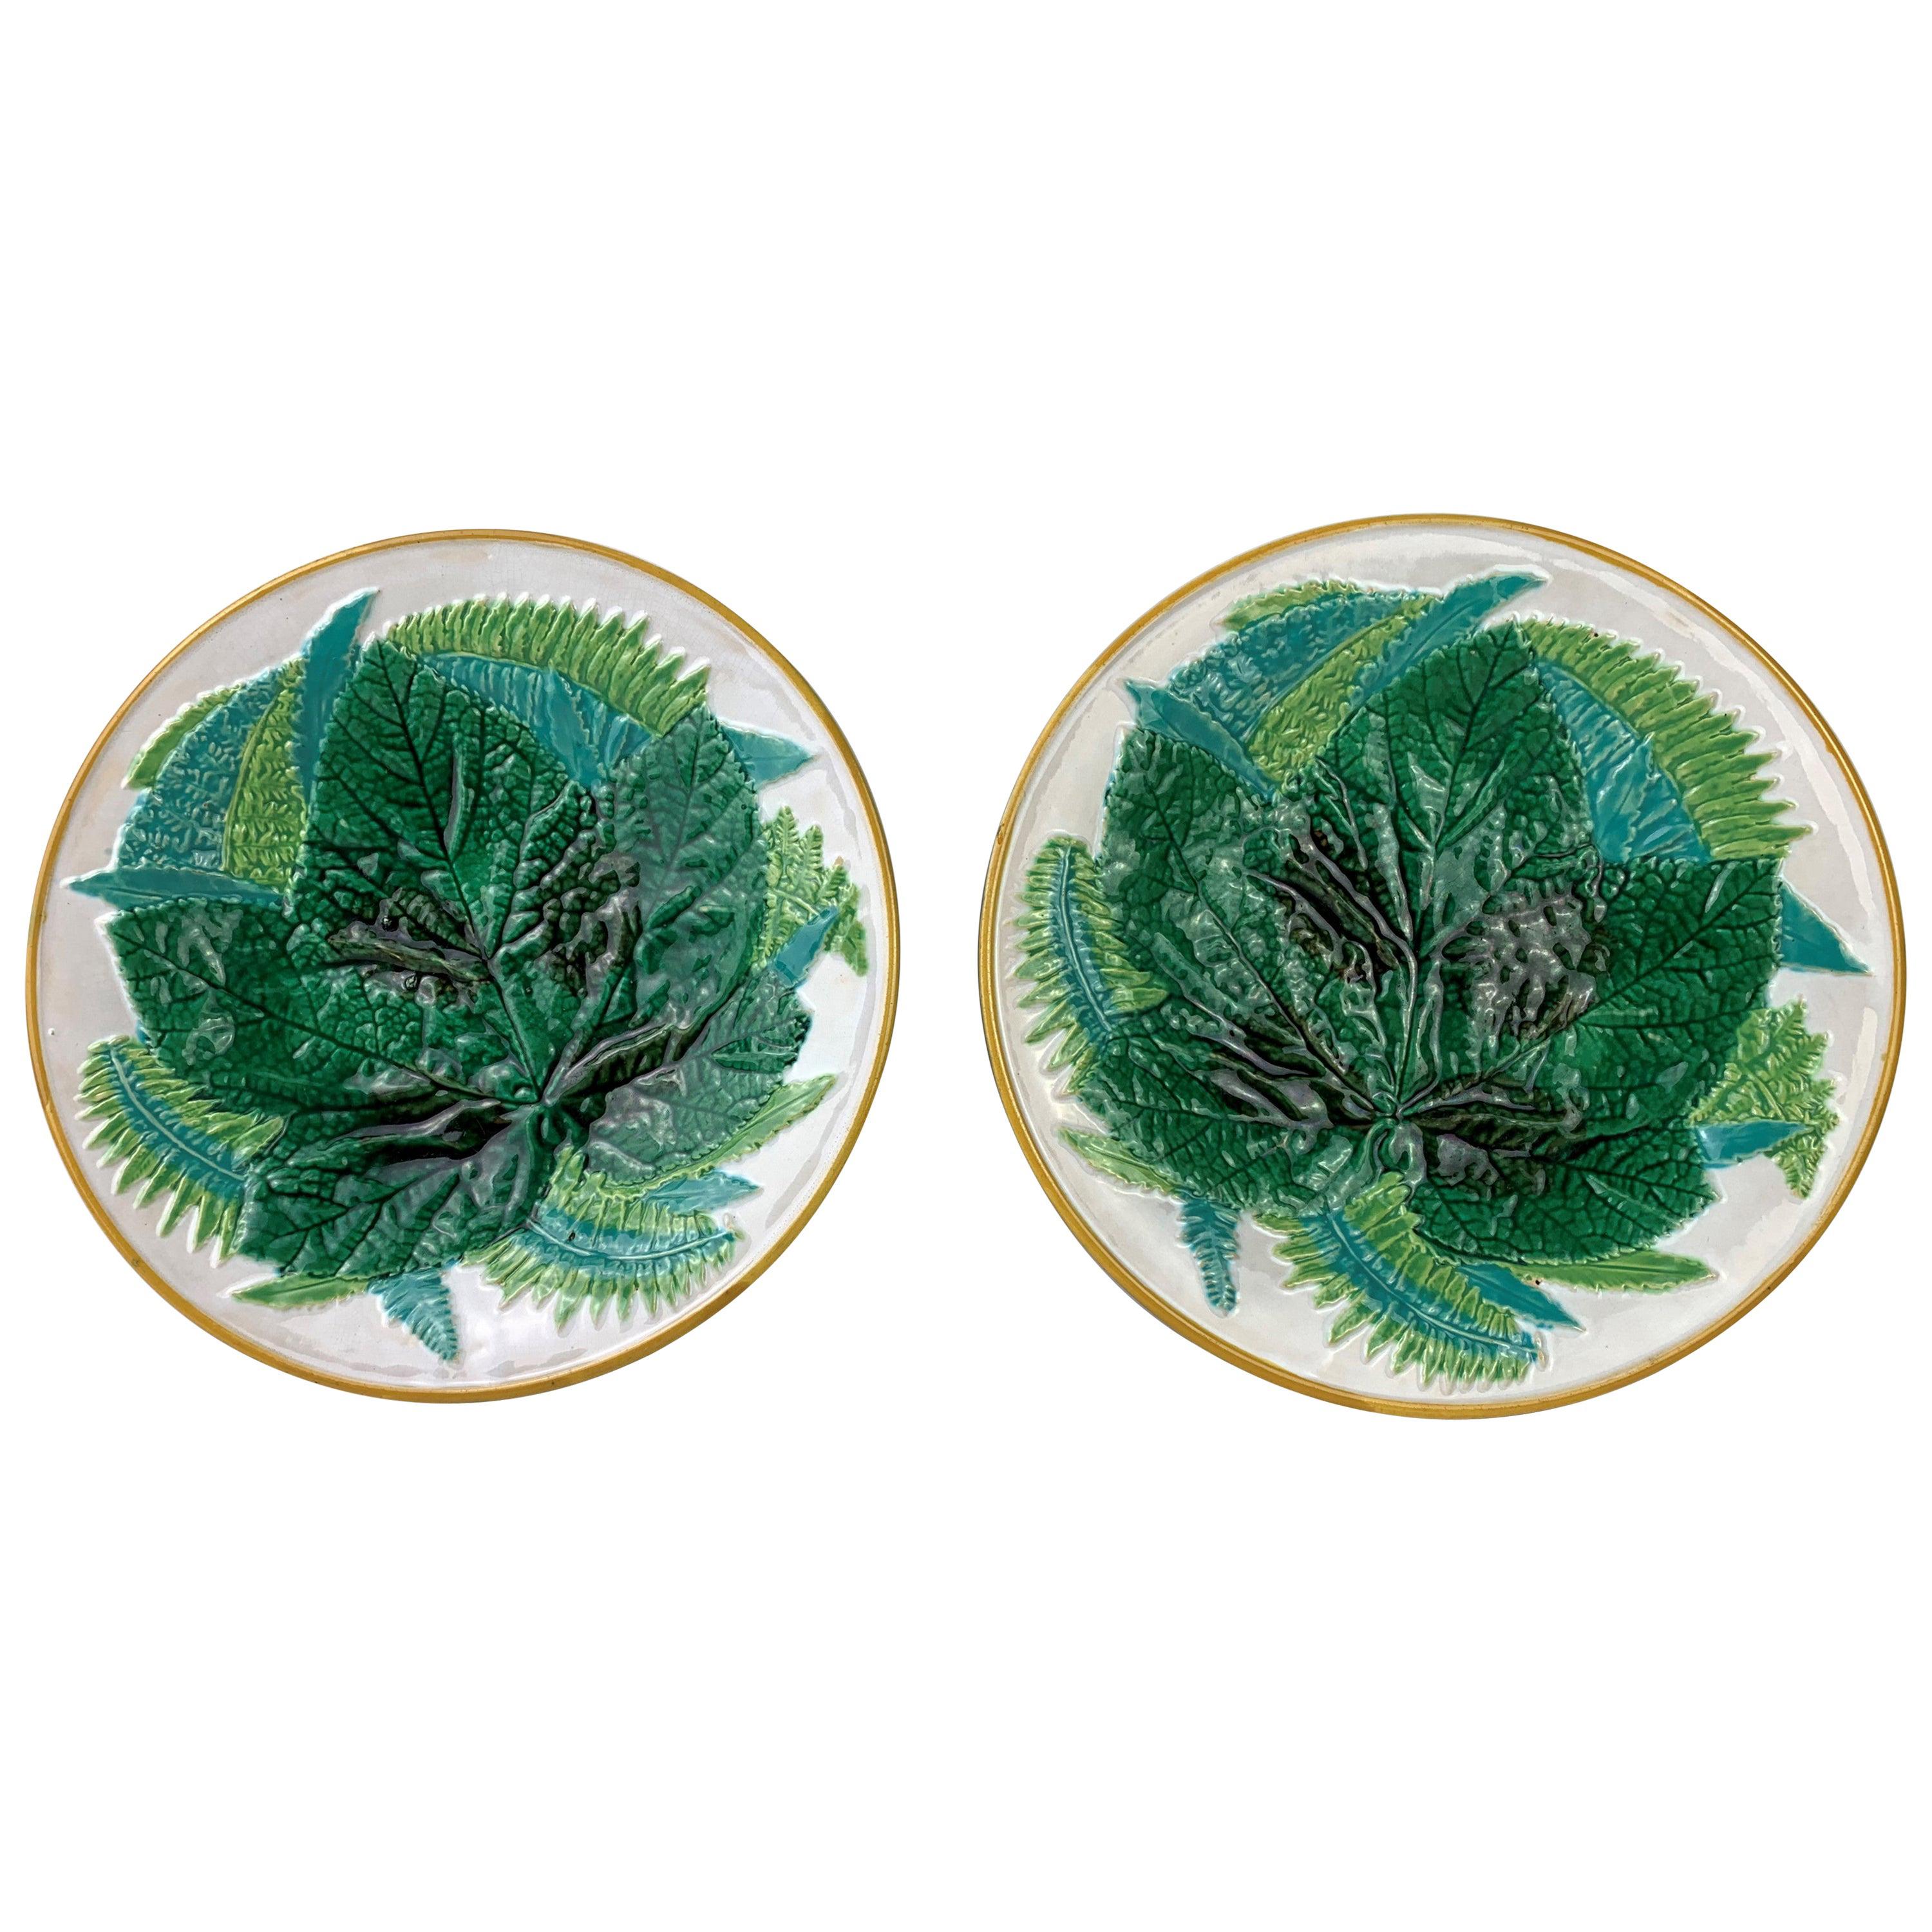 Pair of George Jones Majolica Leaf and Ferns Plates White Ground, English